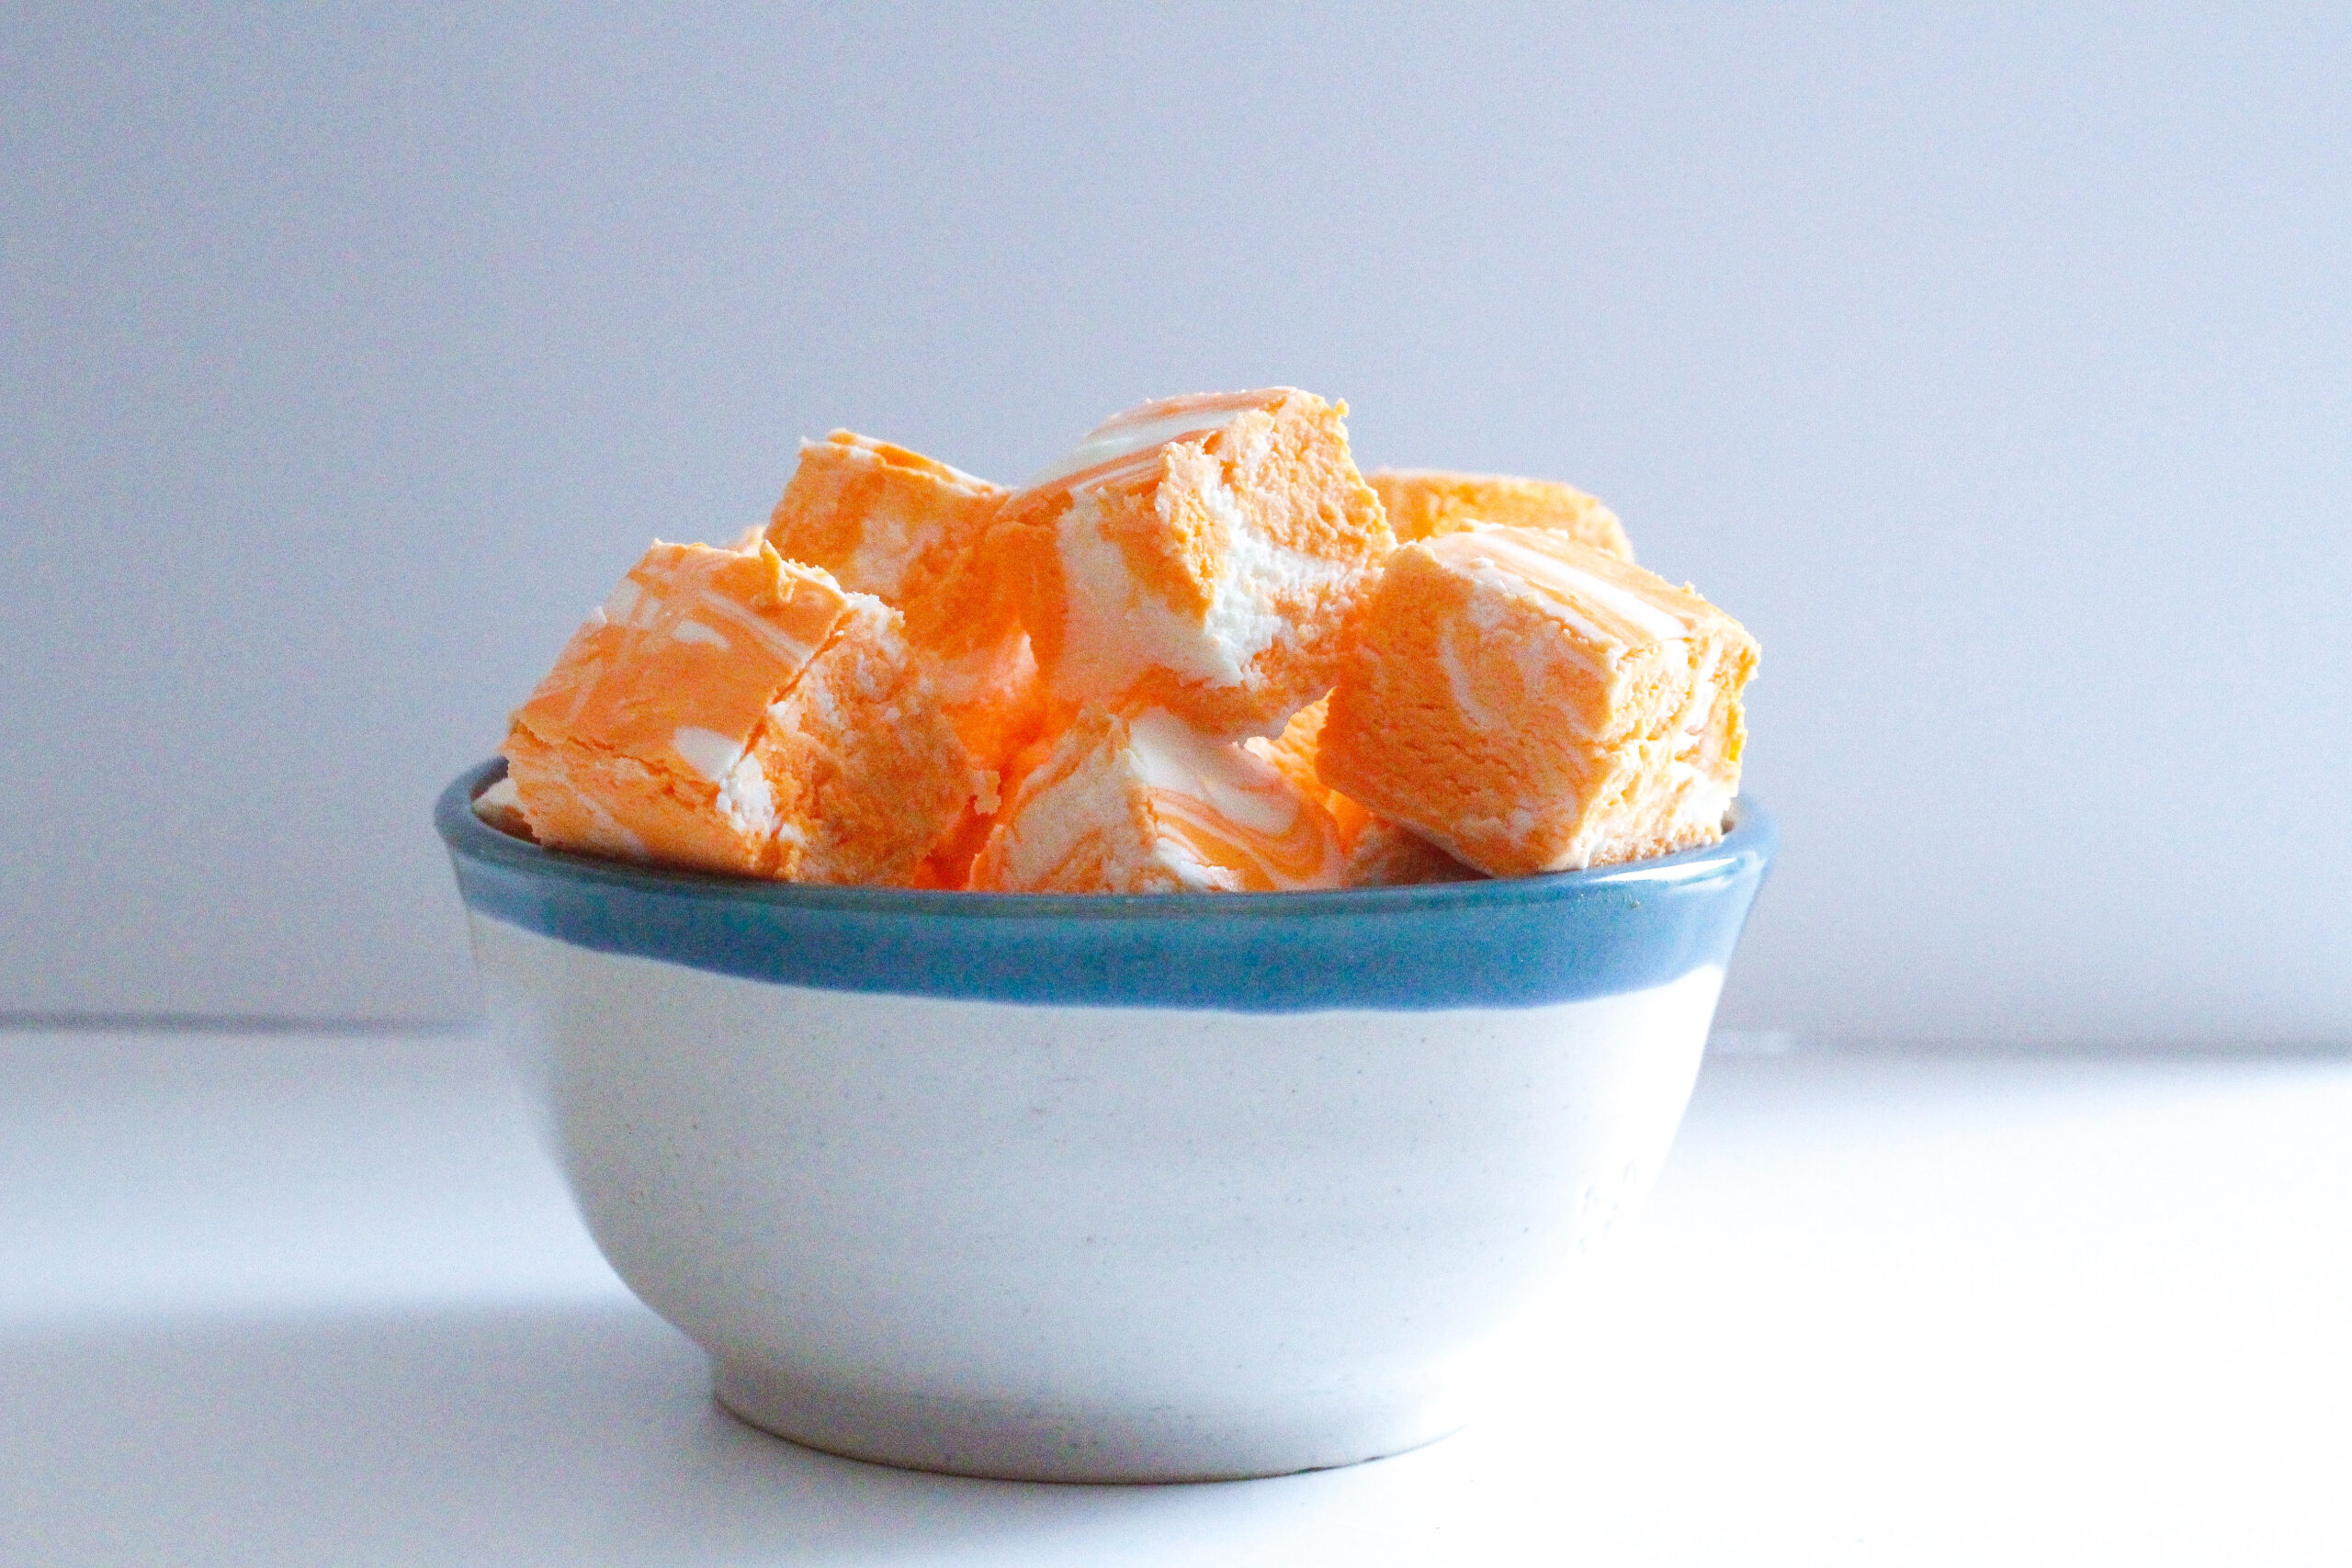 Side view of a white bowl with a blue rim filled with creamsicle fudge, orange and white swirled fudge cubes